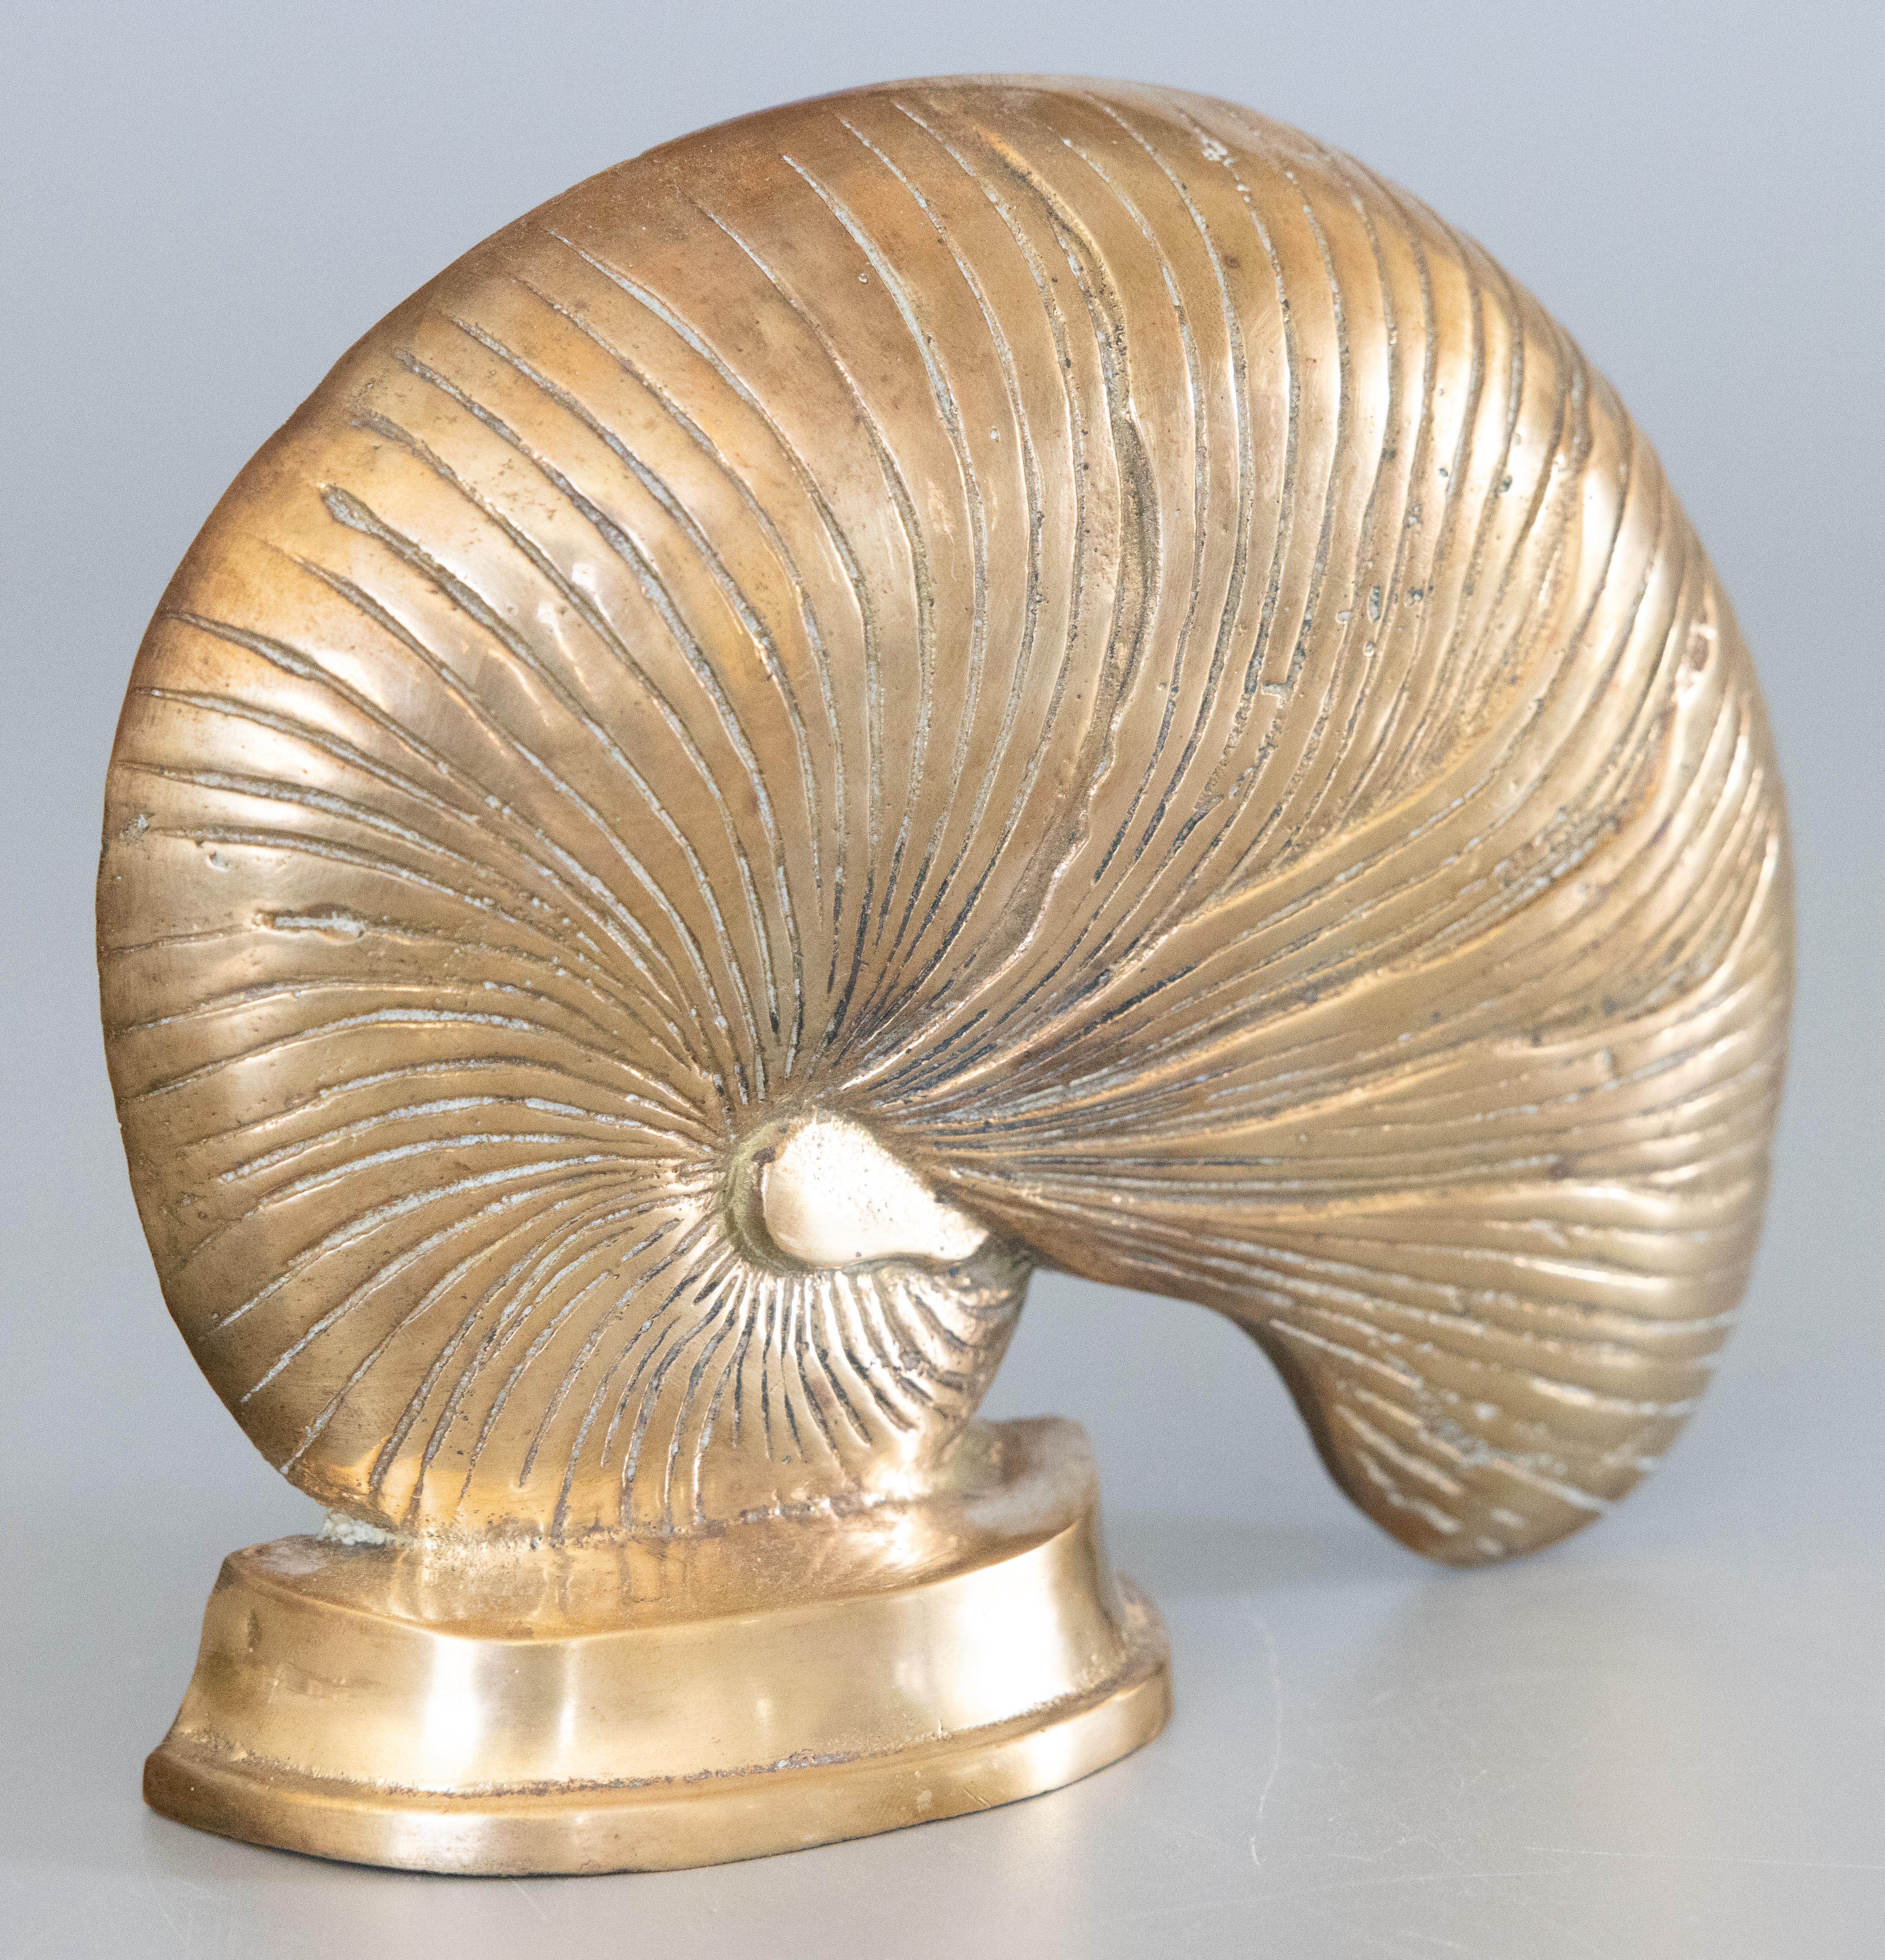 Beautiful vintage Mid-Century French brass nautilus shell paper weight bookend objet d'Art. A solid and heavy piece, weighing approximately 2 lbs. It's a stylish piece for any room decor, perfect for displaying on a bookshelf or